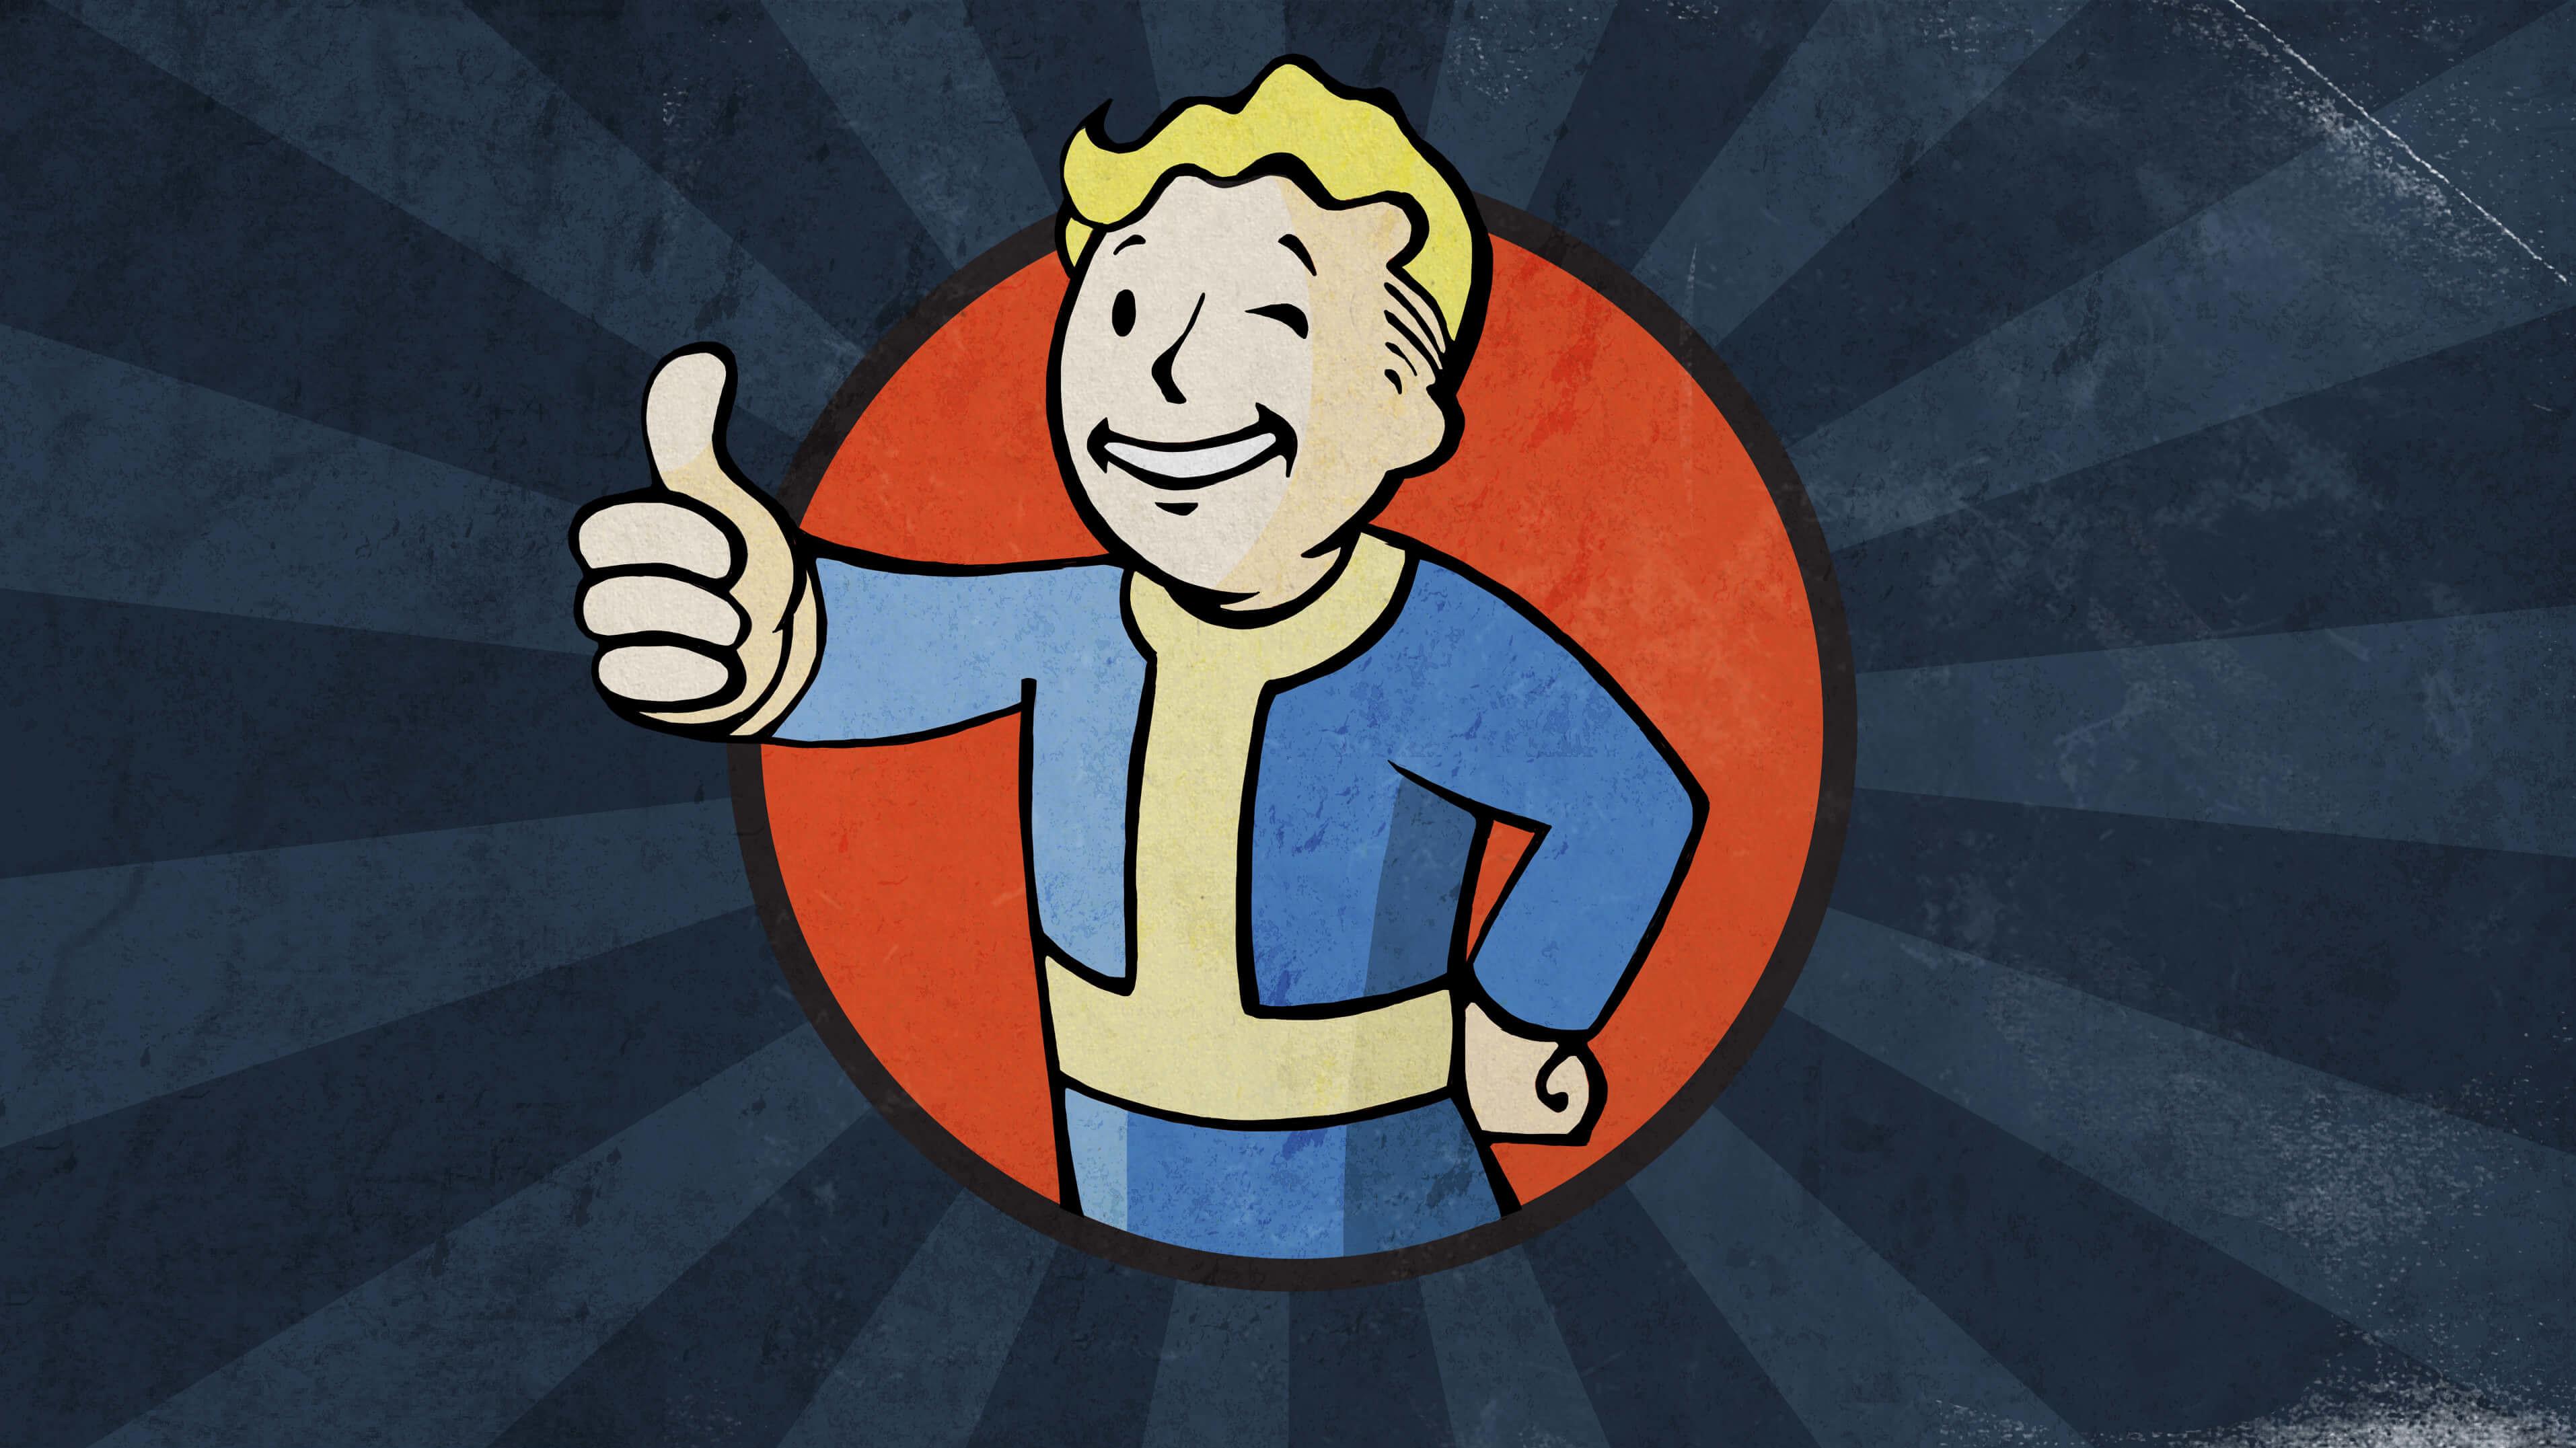 Fallout 4 wallpapers 4k фото 39